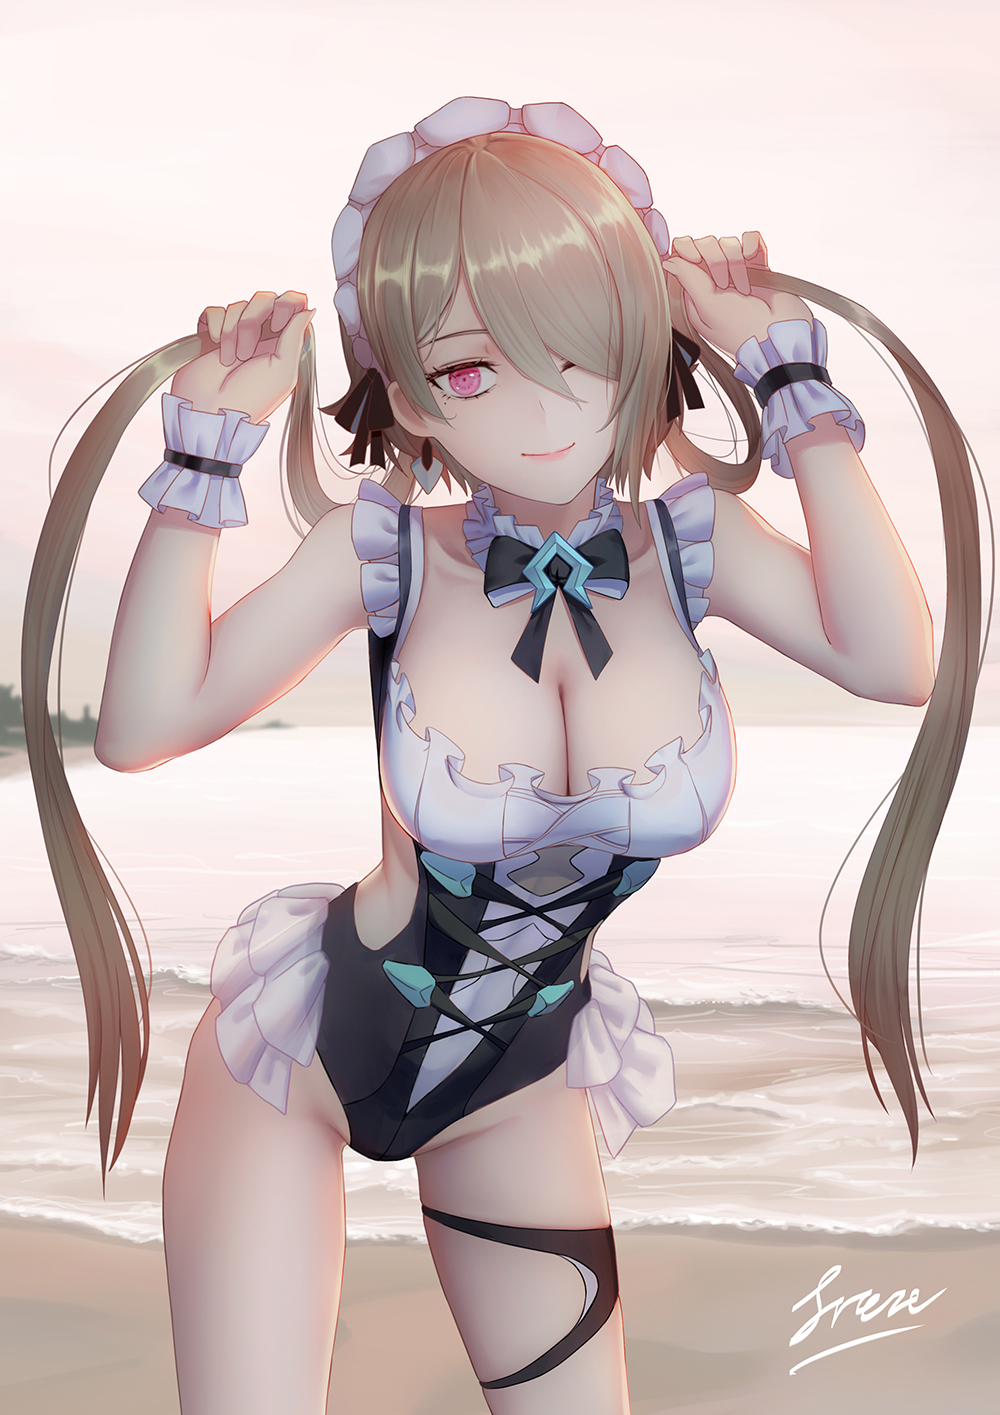 Anime 1000x1415 maid outfit Rita Rossweisse Honkai Impact 3rd ocean view cleavage anime